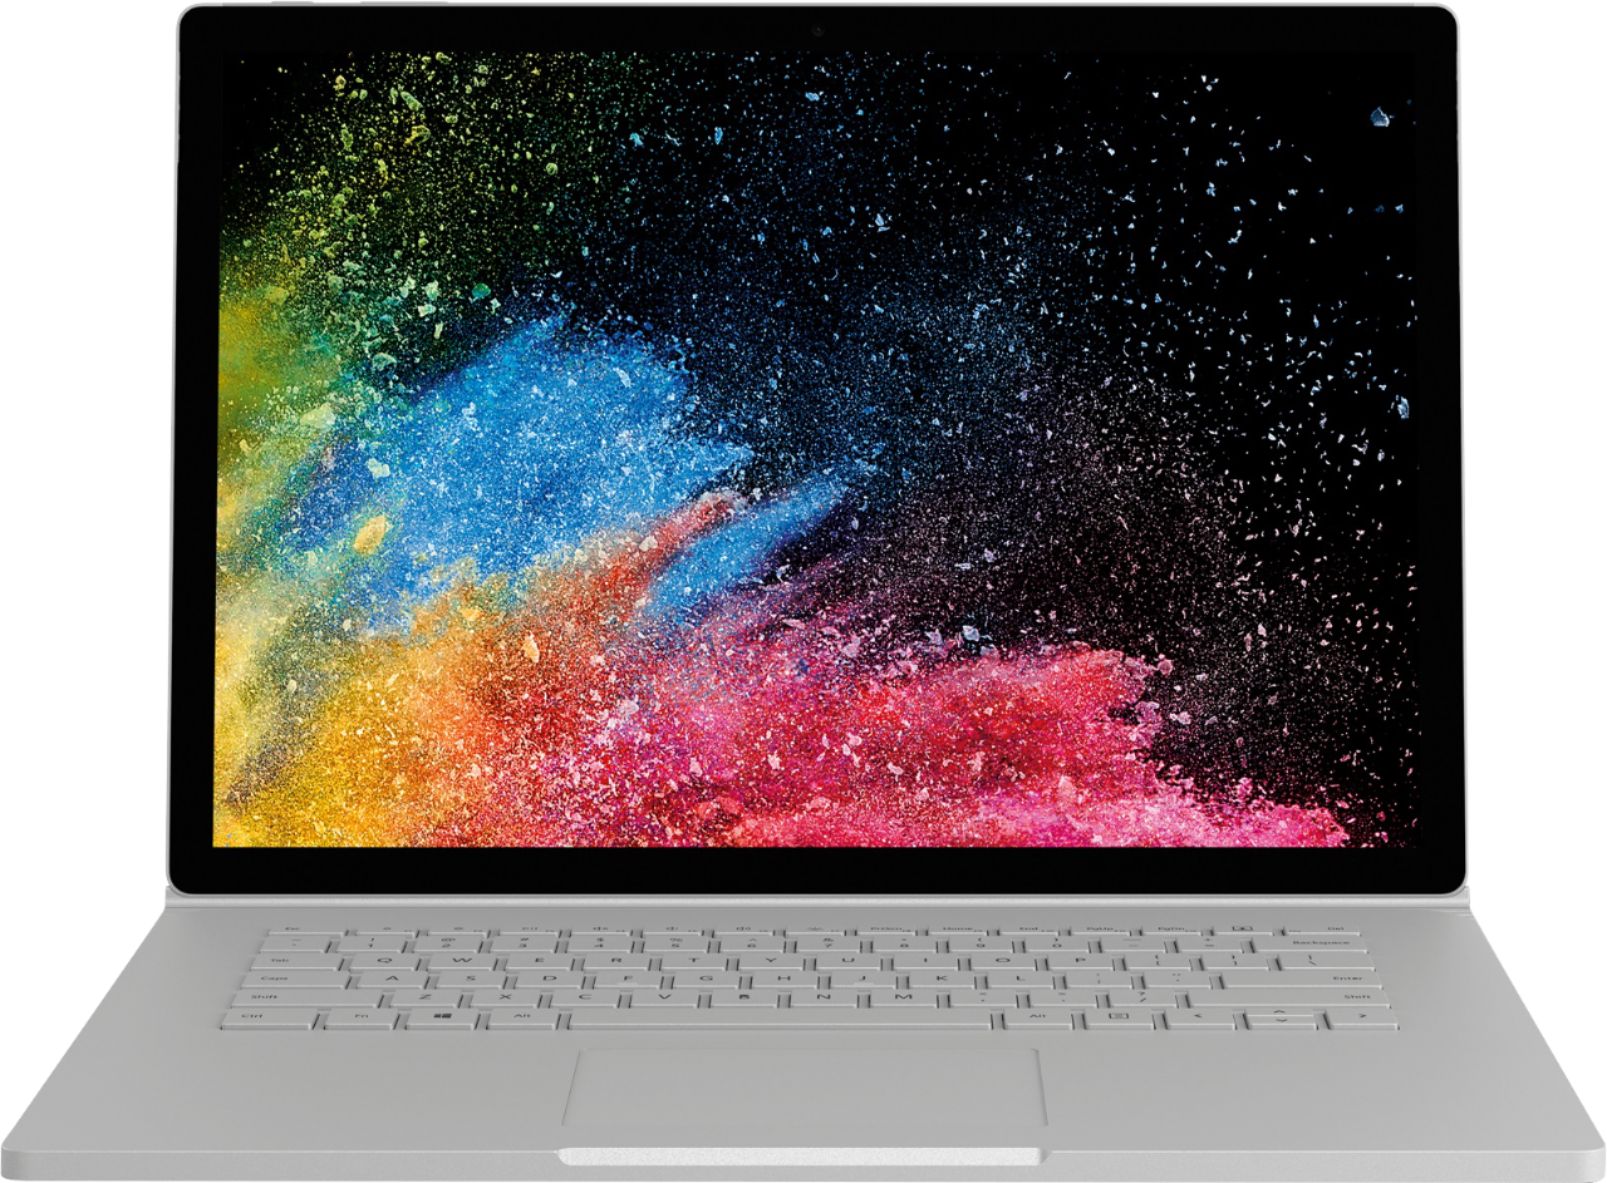 Microsoft – Geek Squad Certified Refurbished Surface Book 2 – 15″ Touch-Screen Laptop – Intel Core i7 – 16GB Memory – 256GB SSD – Silver